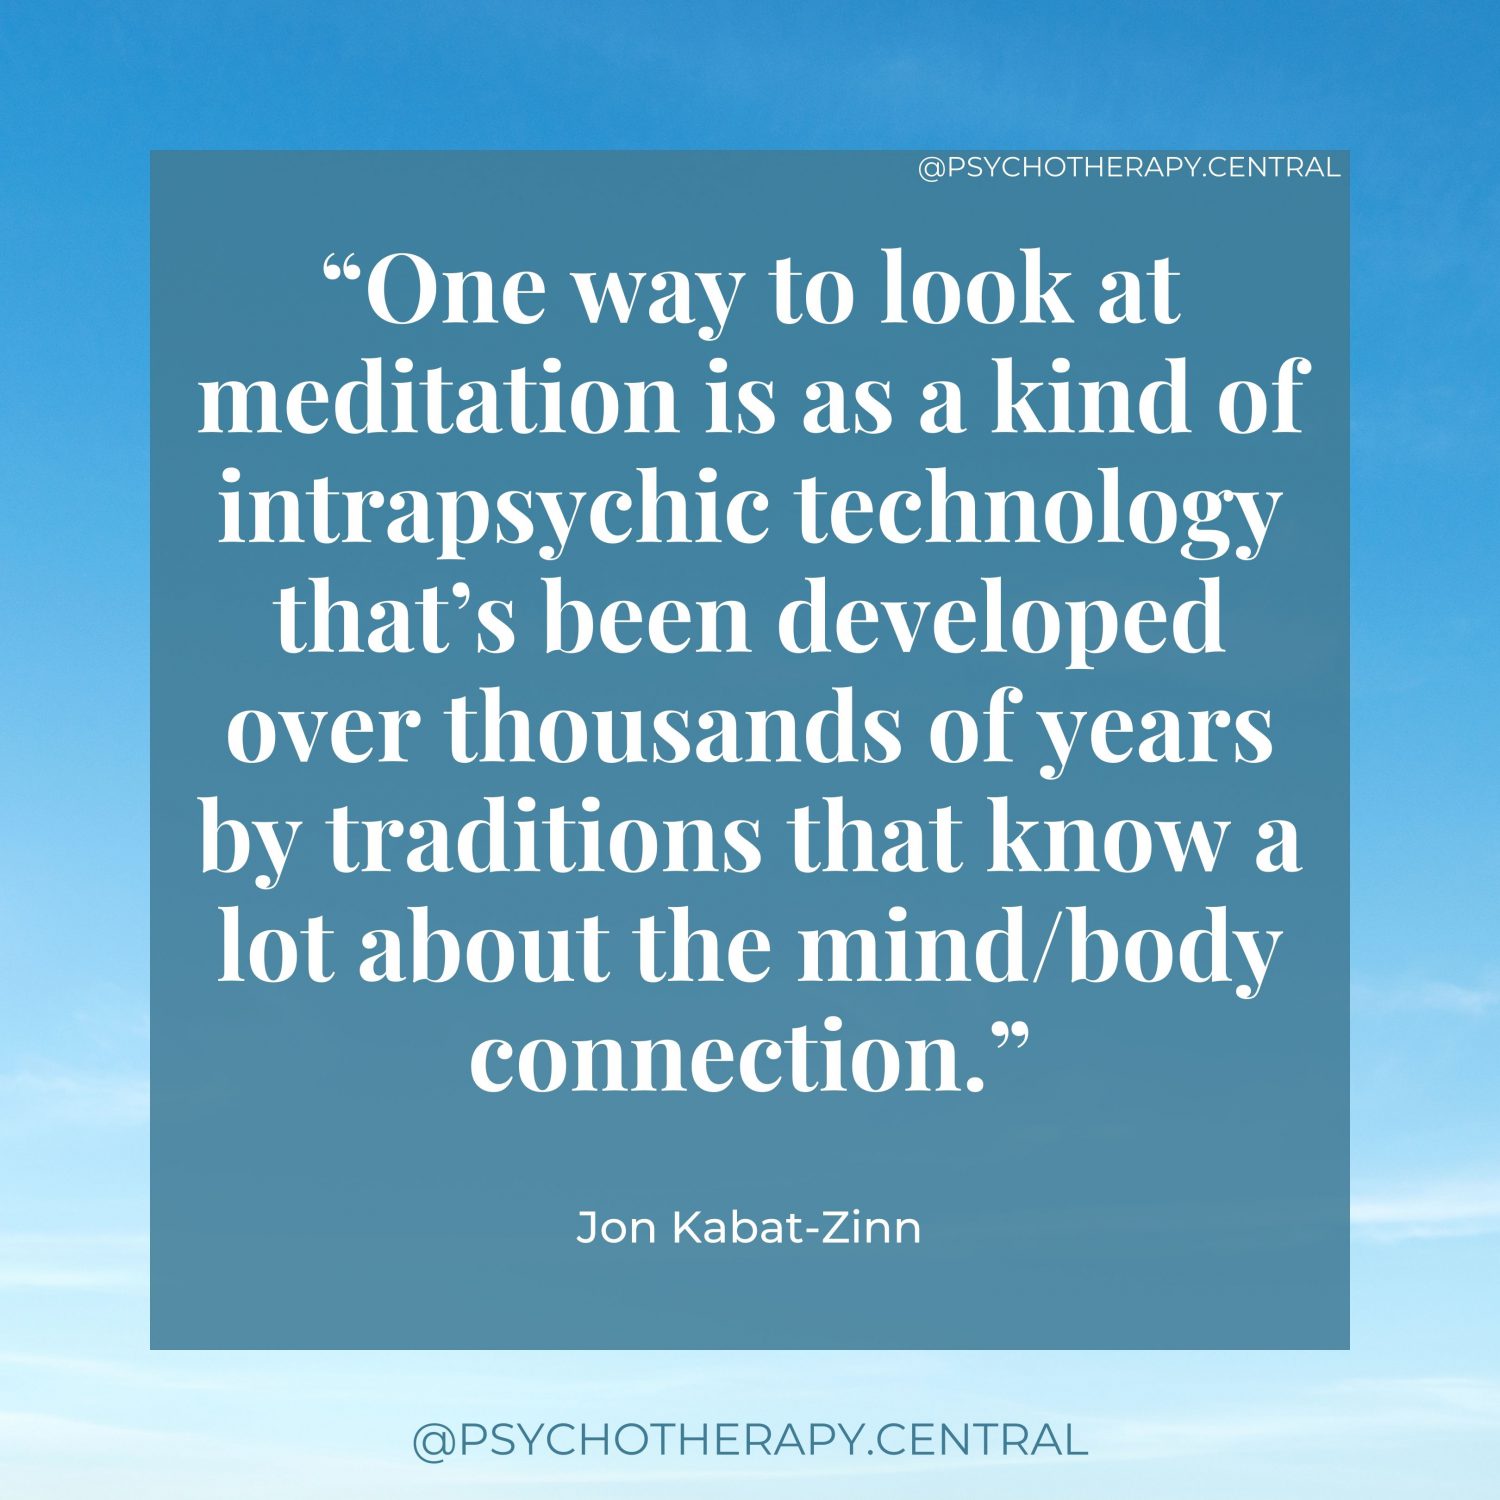 The Separation of the Body and the Mind “One way to look at meditation is as a kind of intrapsychic technology that’s been developed over thousands of years by traditions that know a lot about the mind/body connection.” Jon Kabat-Zinn